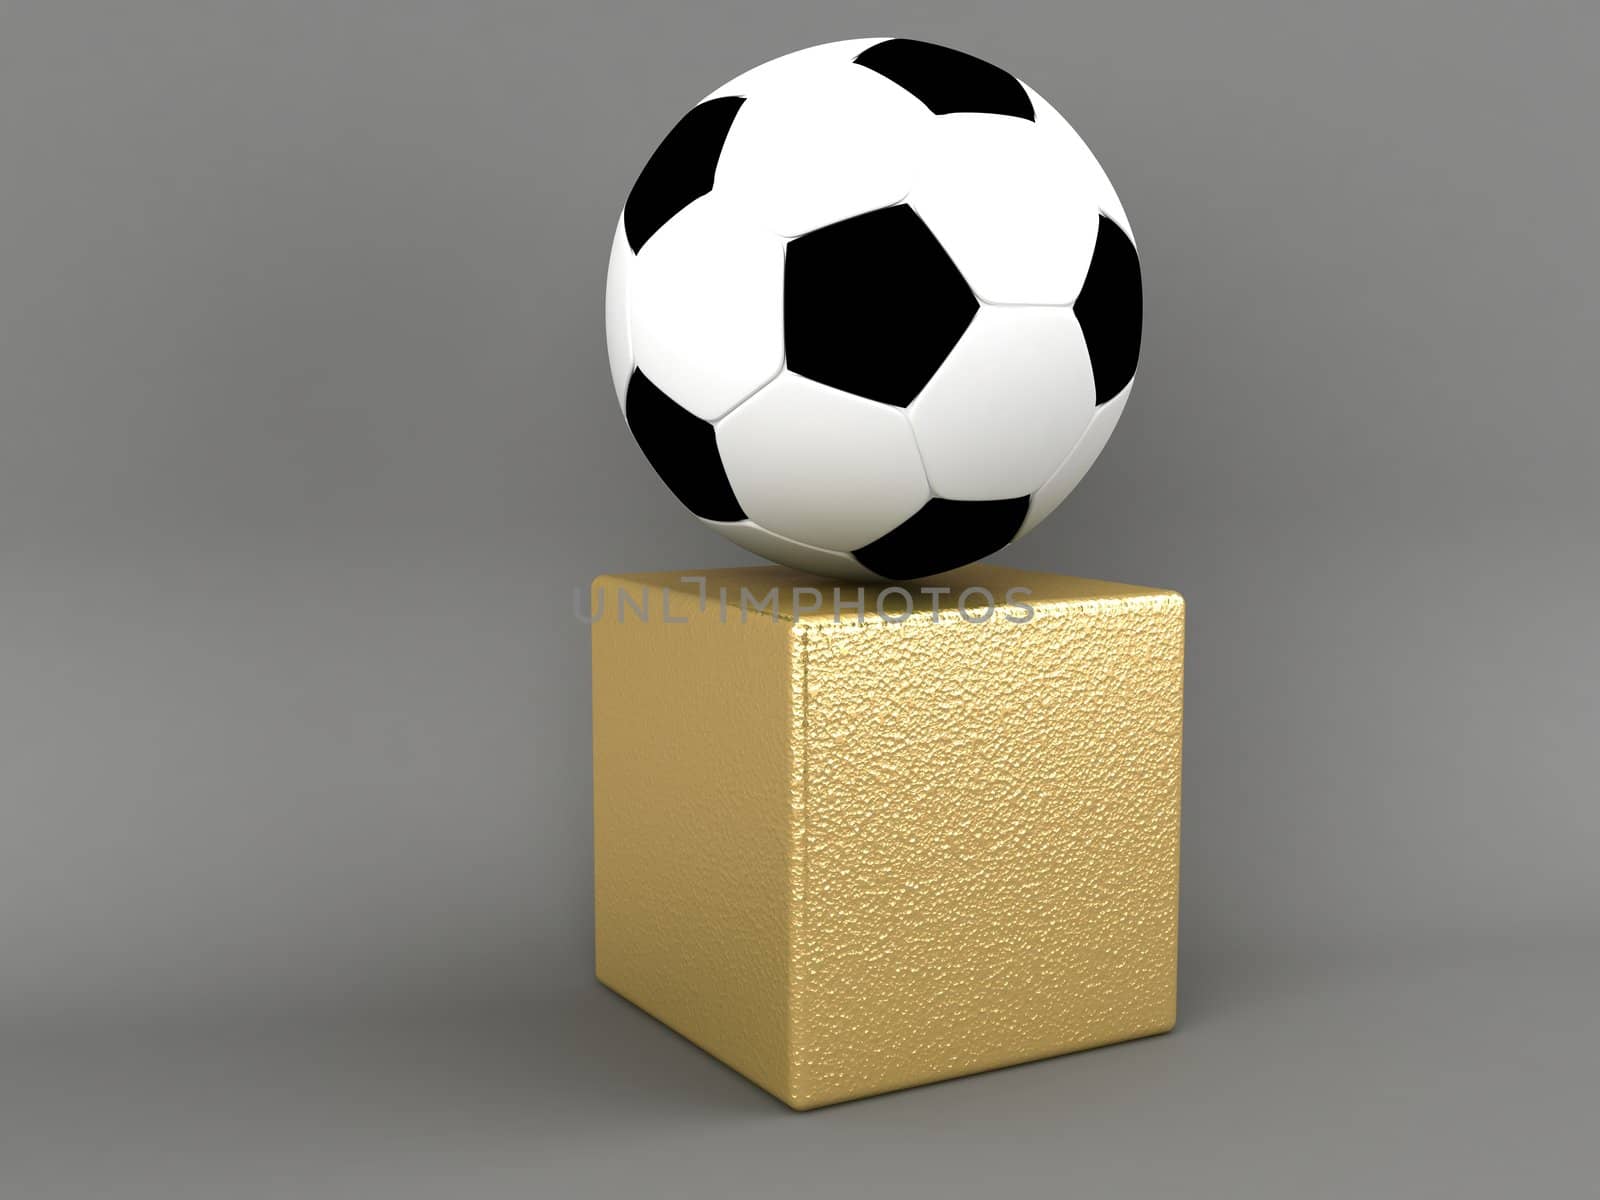 Football on a gold pedestal on a grey background